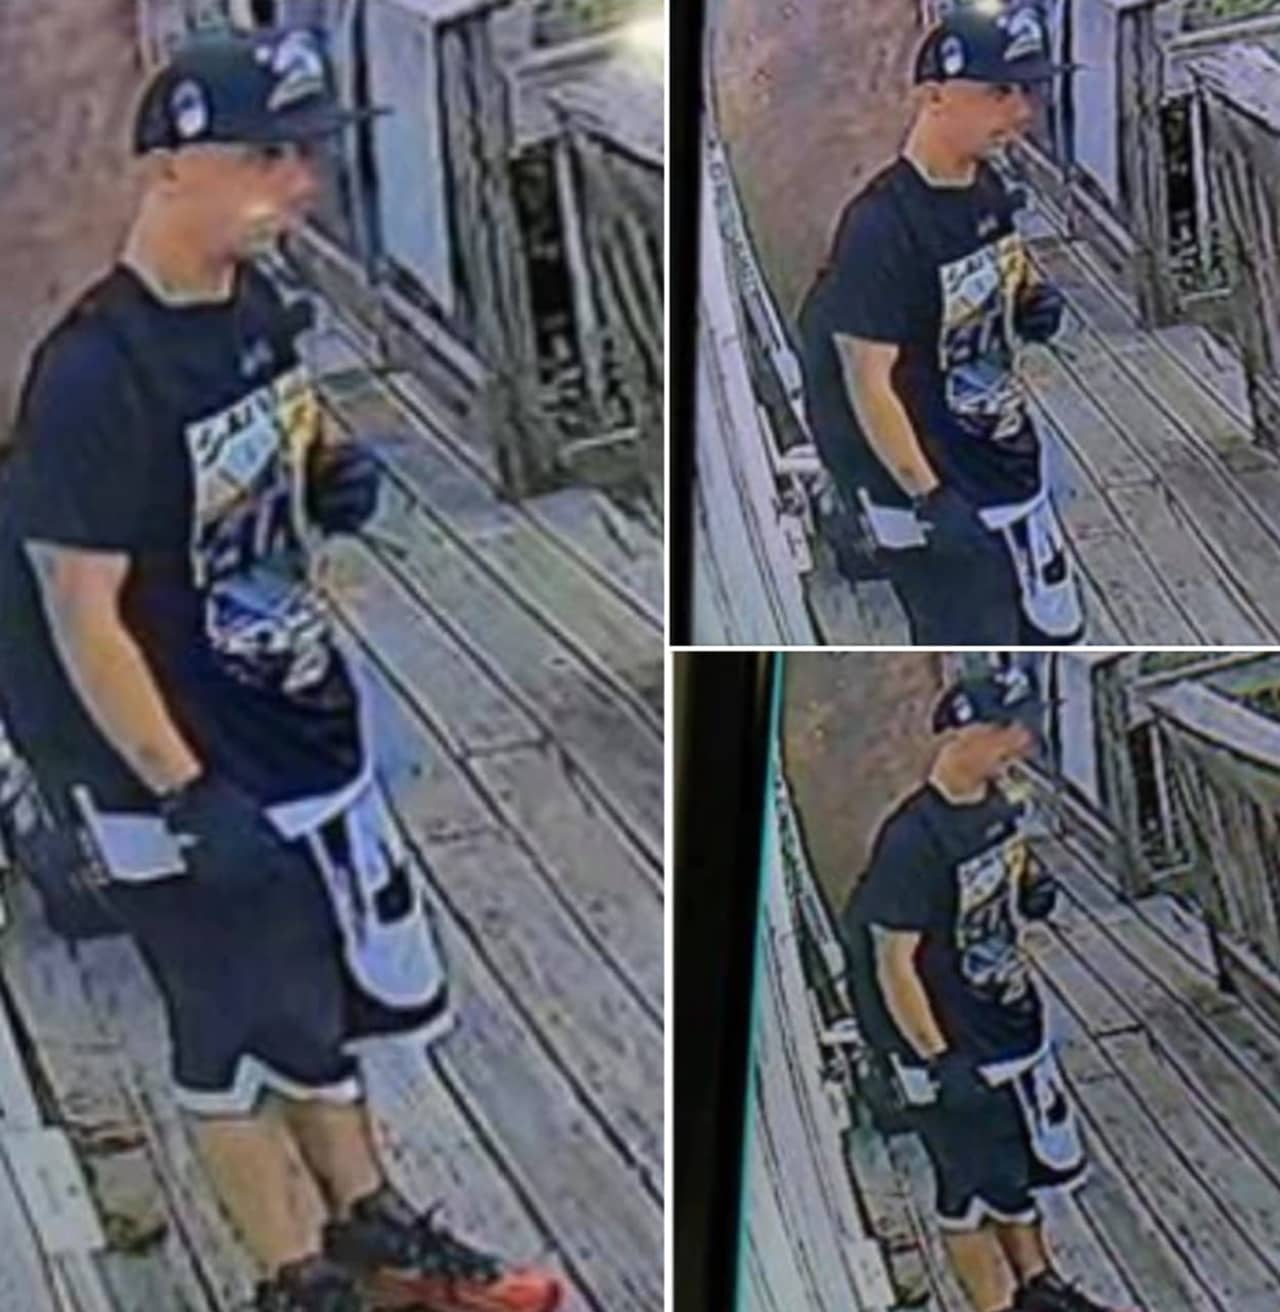 KNOW HIM? Police in Newark are seeking the public’s help locating a man they say stole a handgun and cash from a camper earlier this month.